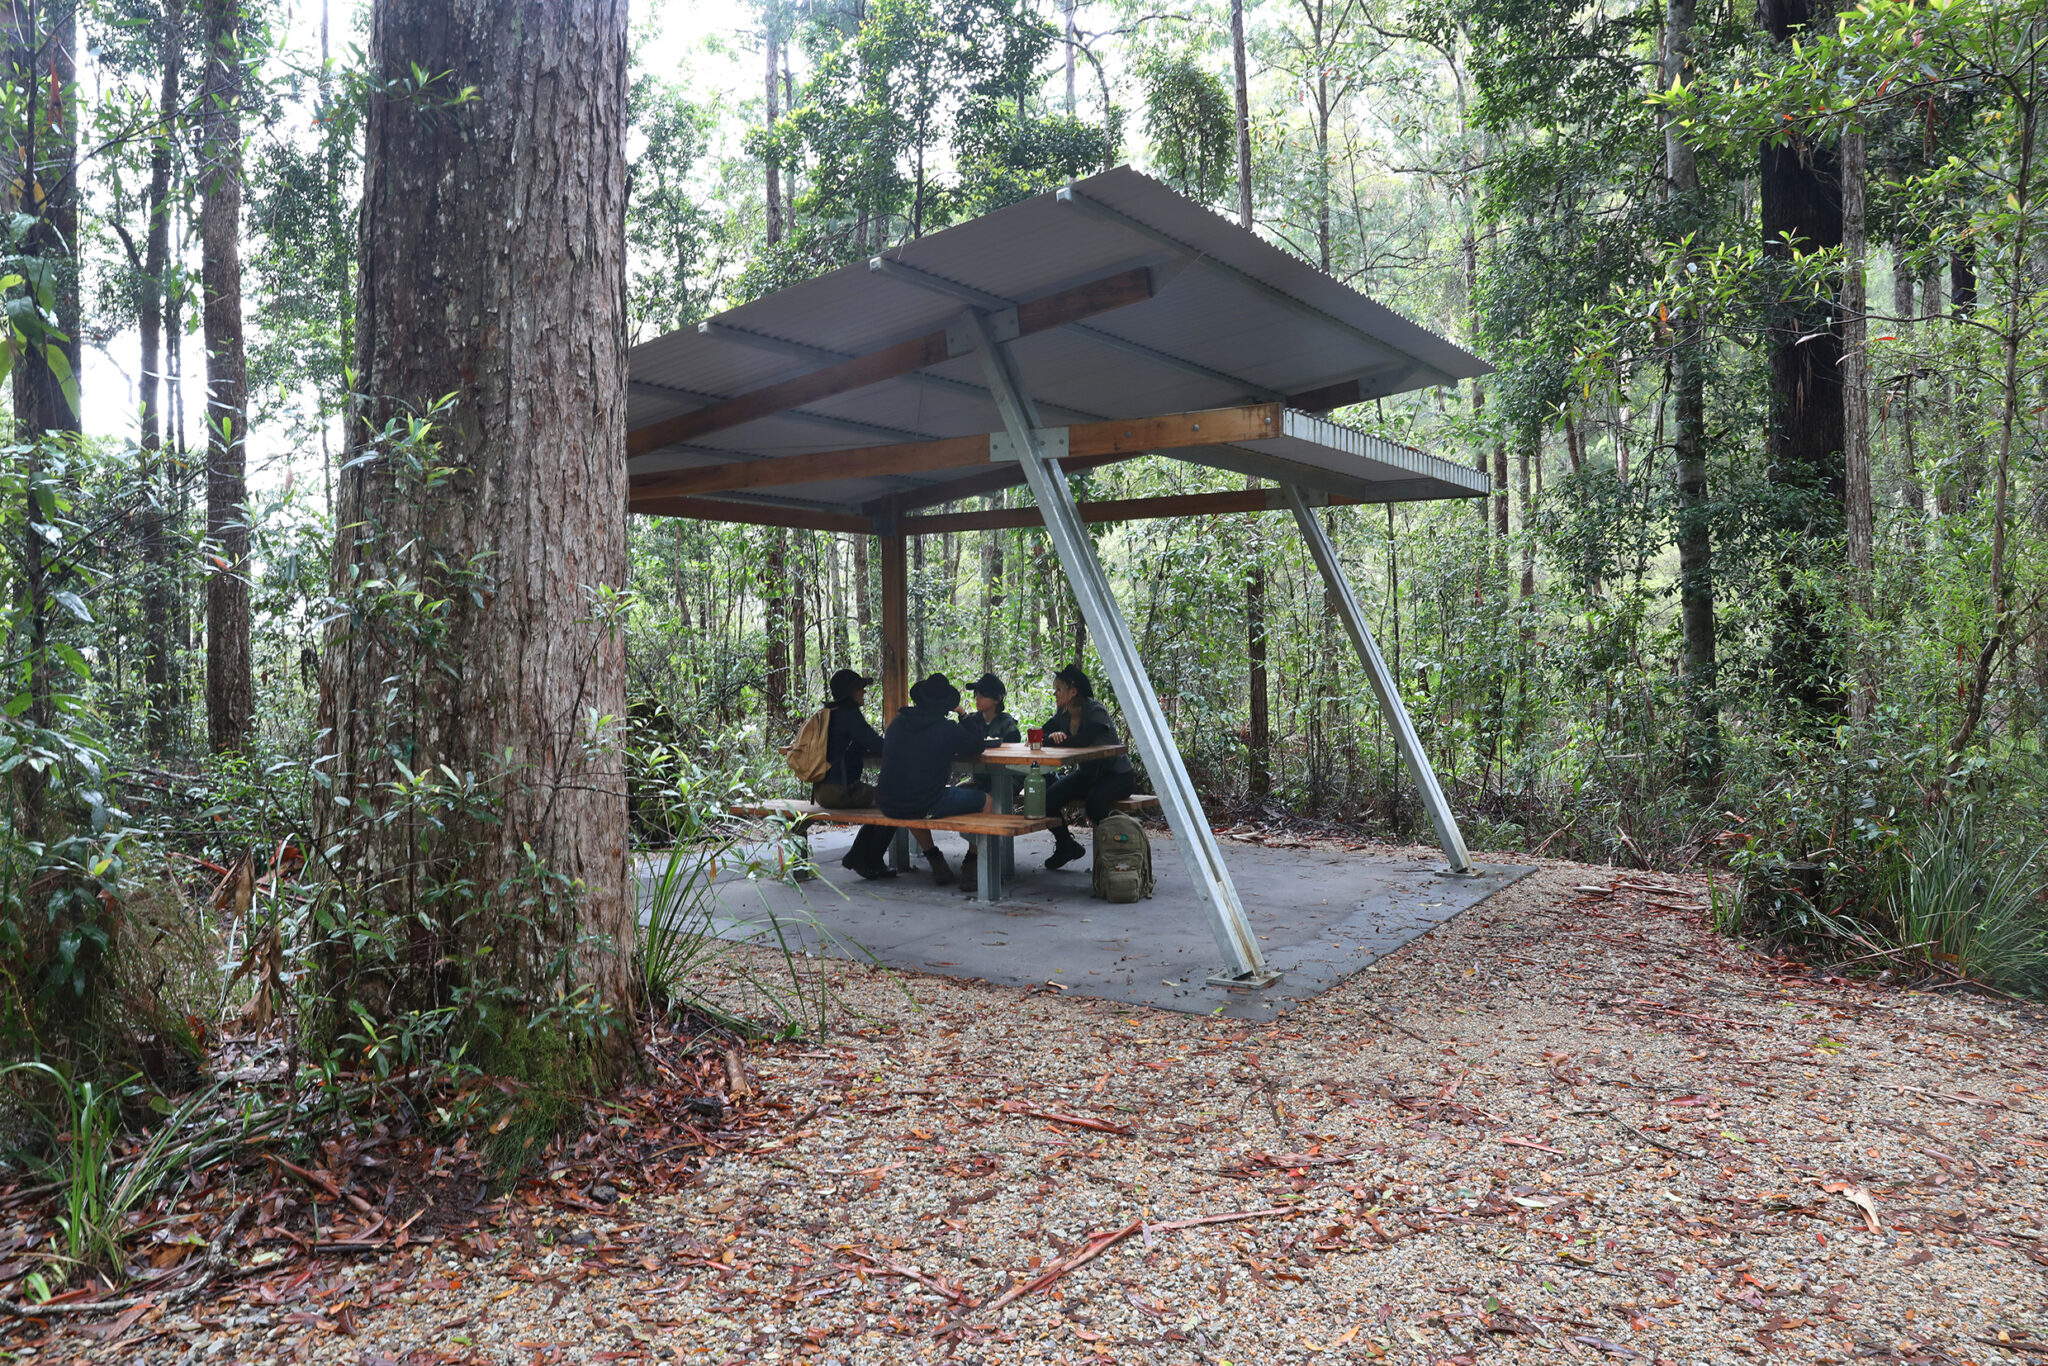 New picnic shelters